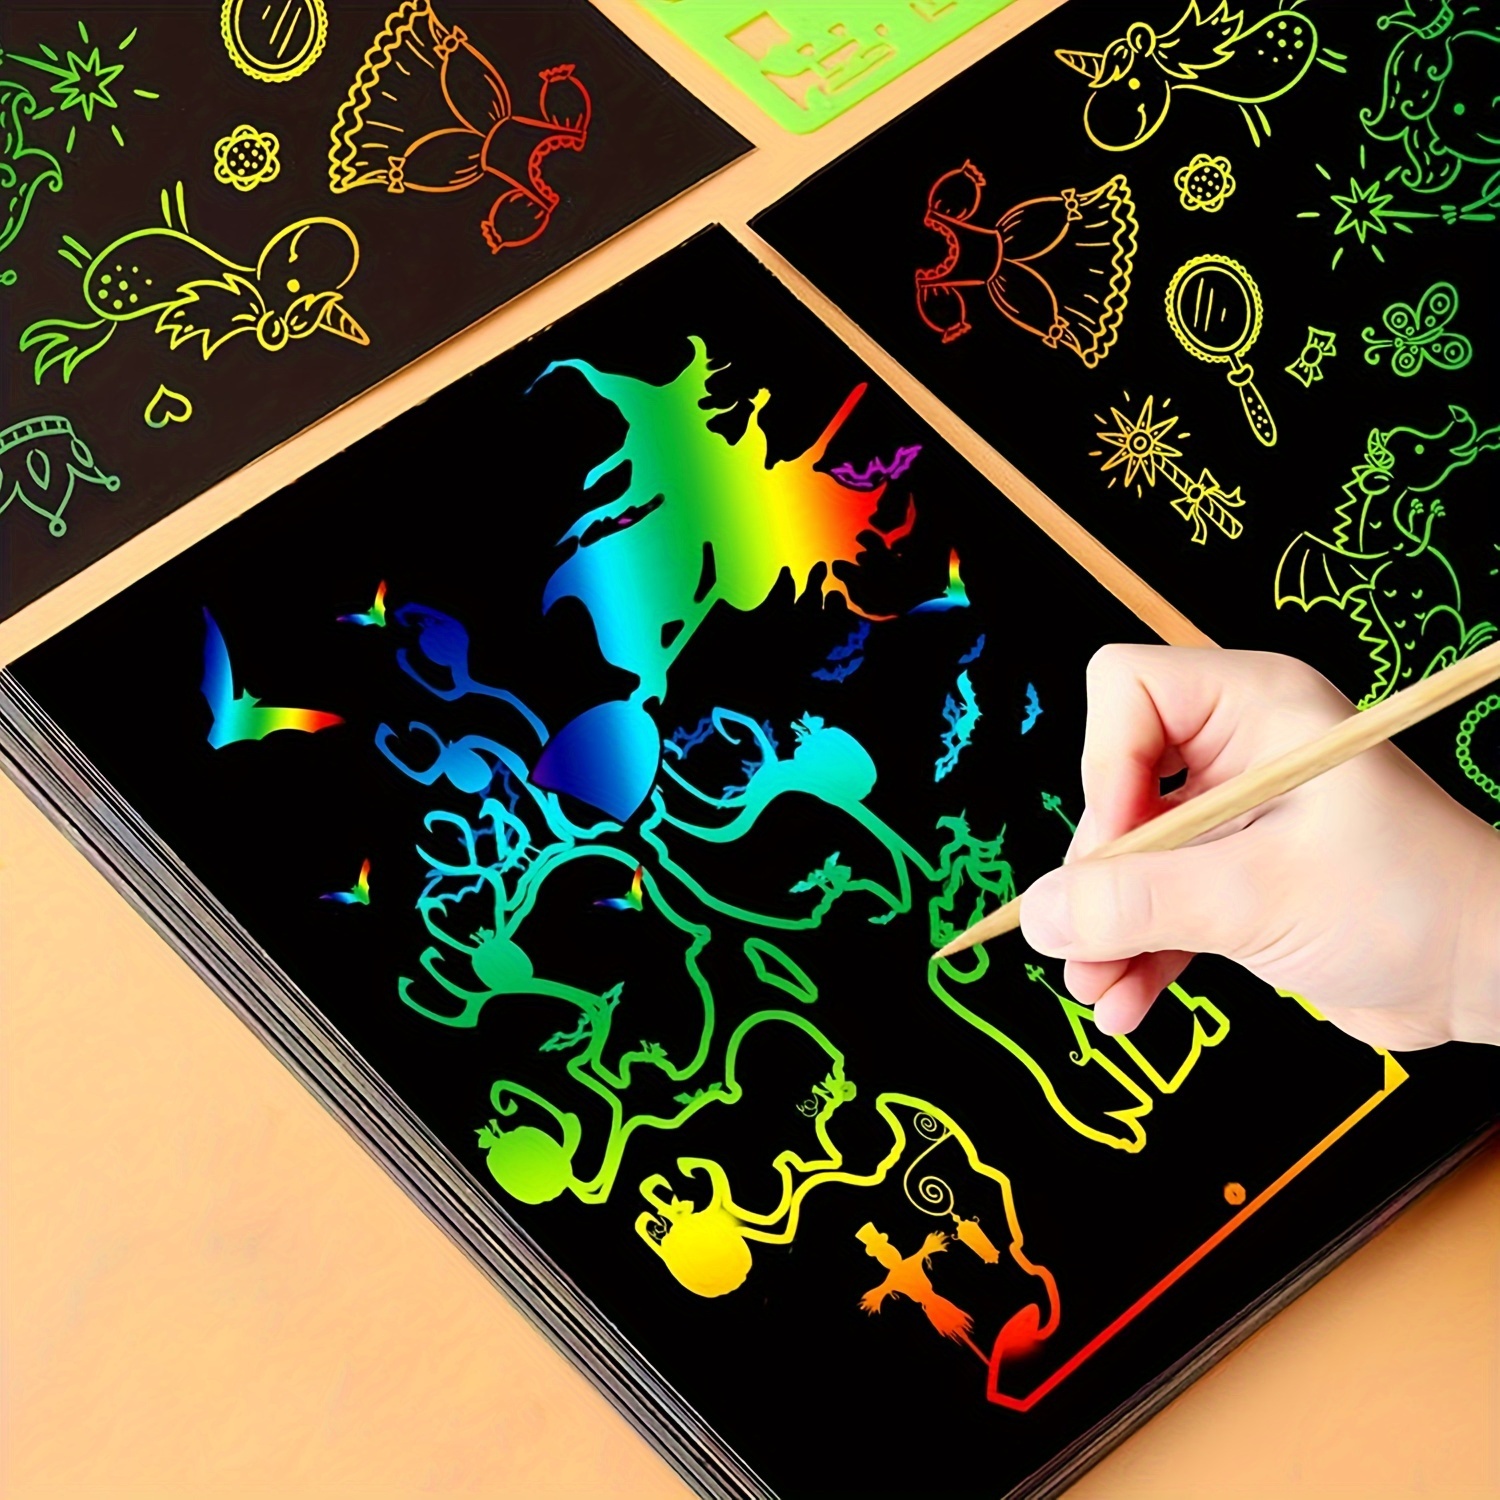 30 Sheet Scratch Art Rainbow Paper Scratchboard, Classroom Art & Craft,  Creative Drawing, Doodling, Writing, Travel Toy, Party Favor for Kid 